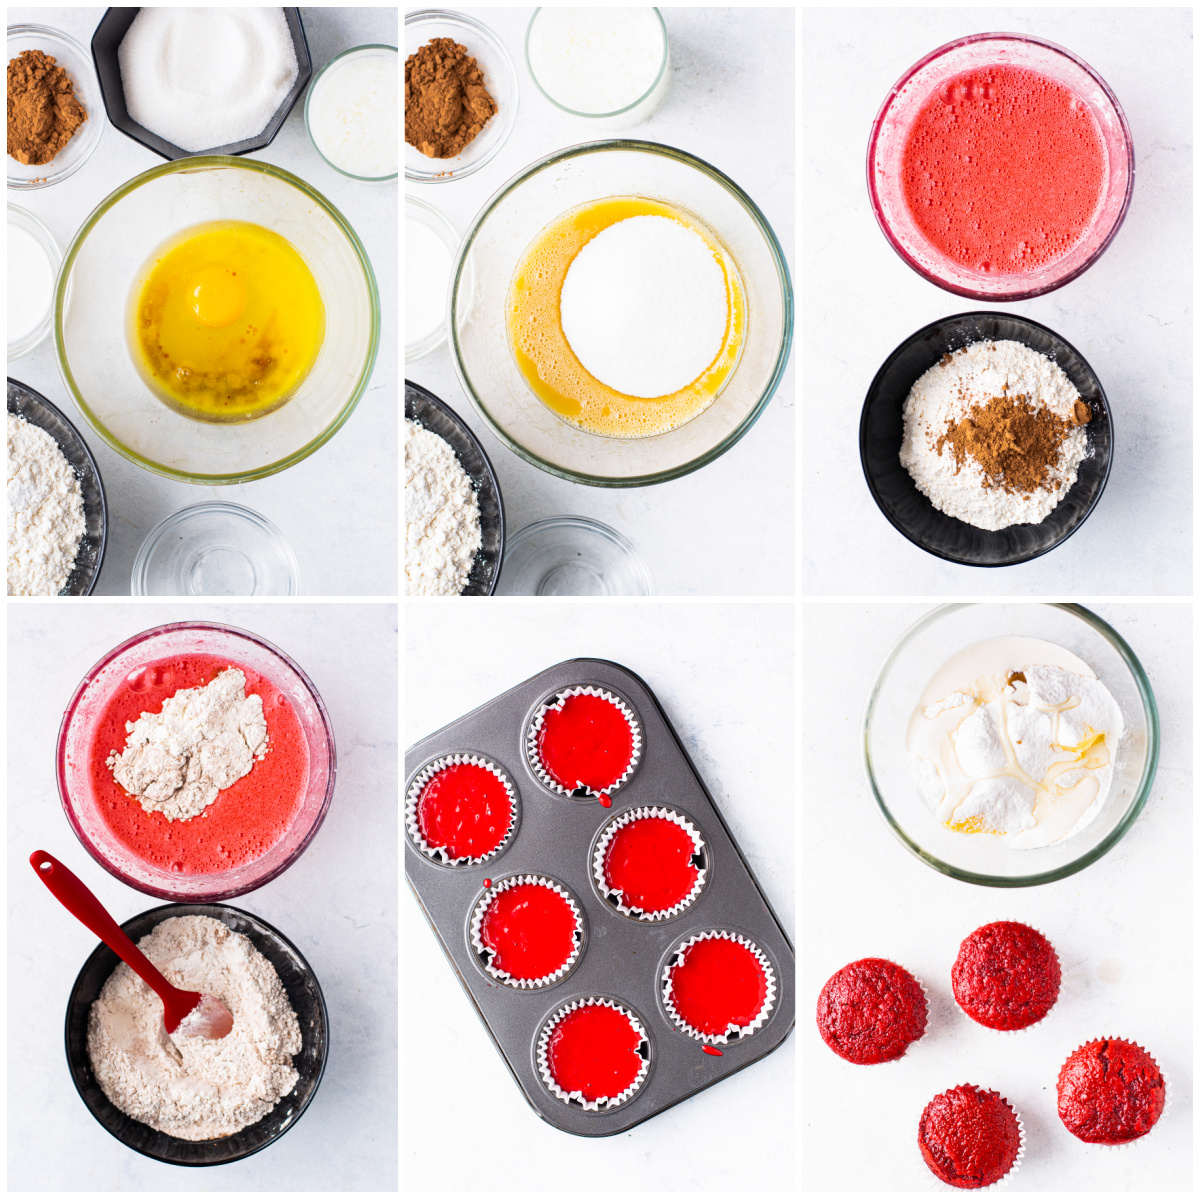 Step by step photos on how to make a Red Velvet Cupcake Recipe.